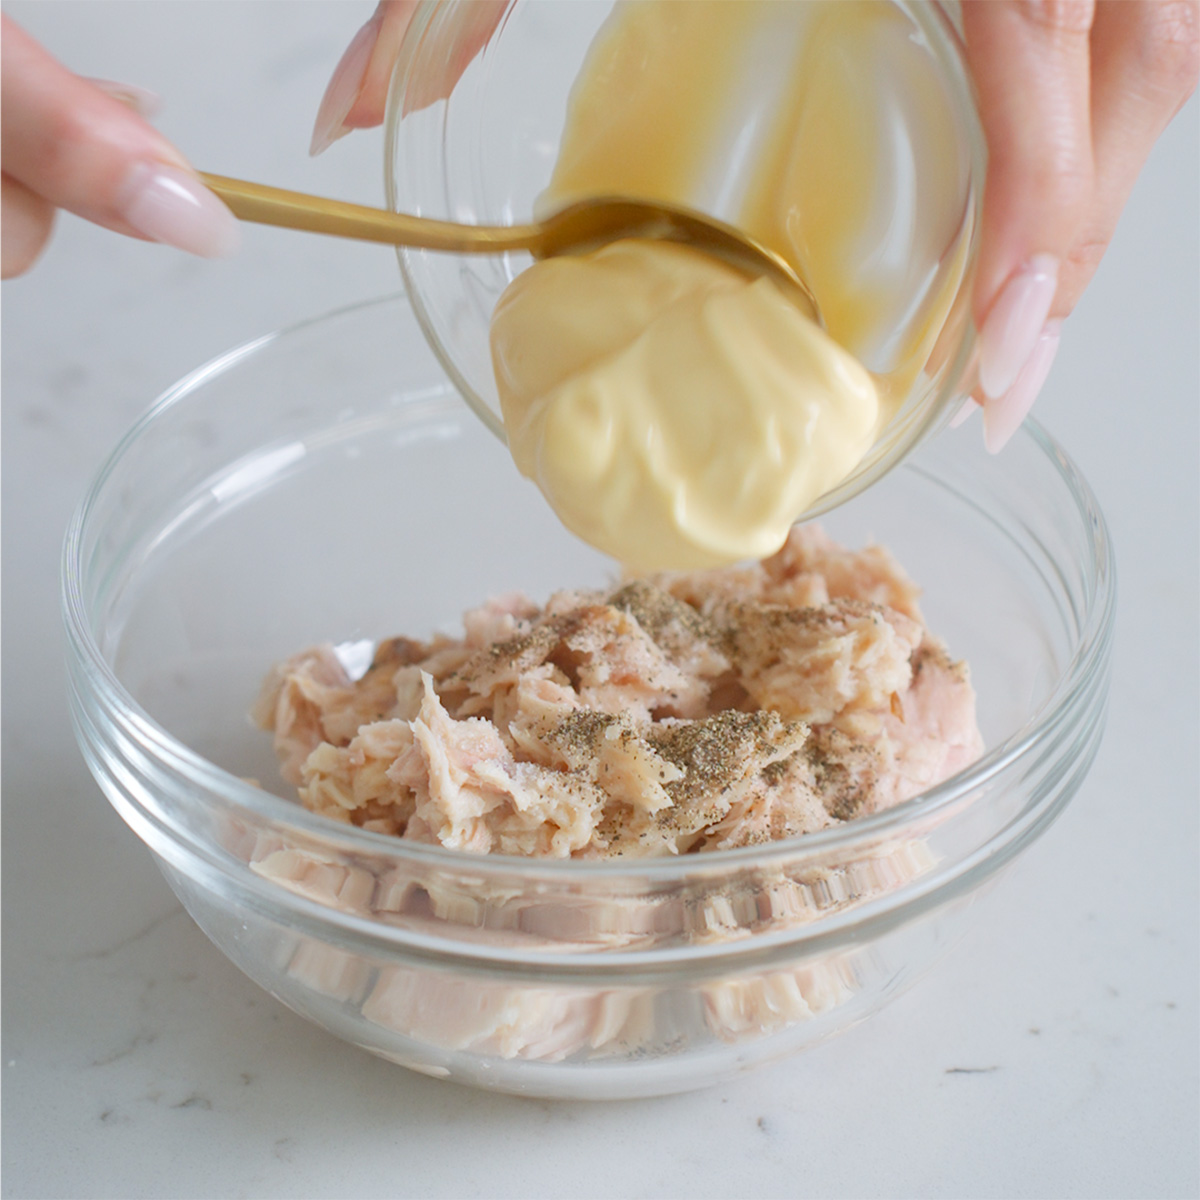 Adding kewpie mayo to a bowl with canned tuna.